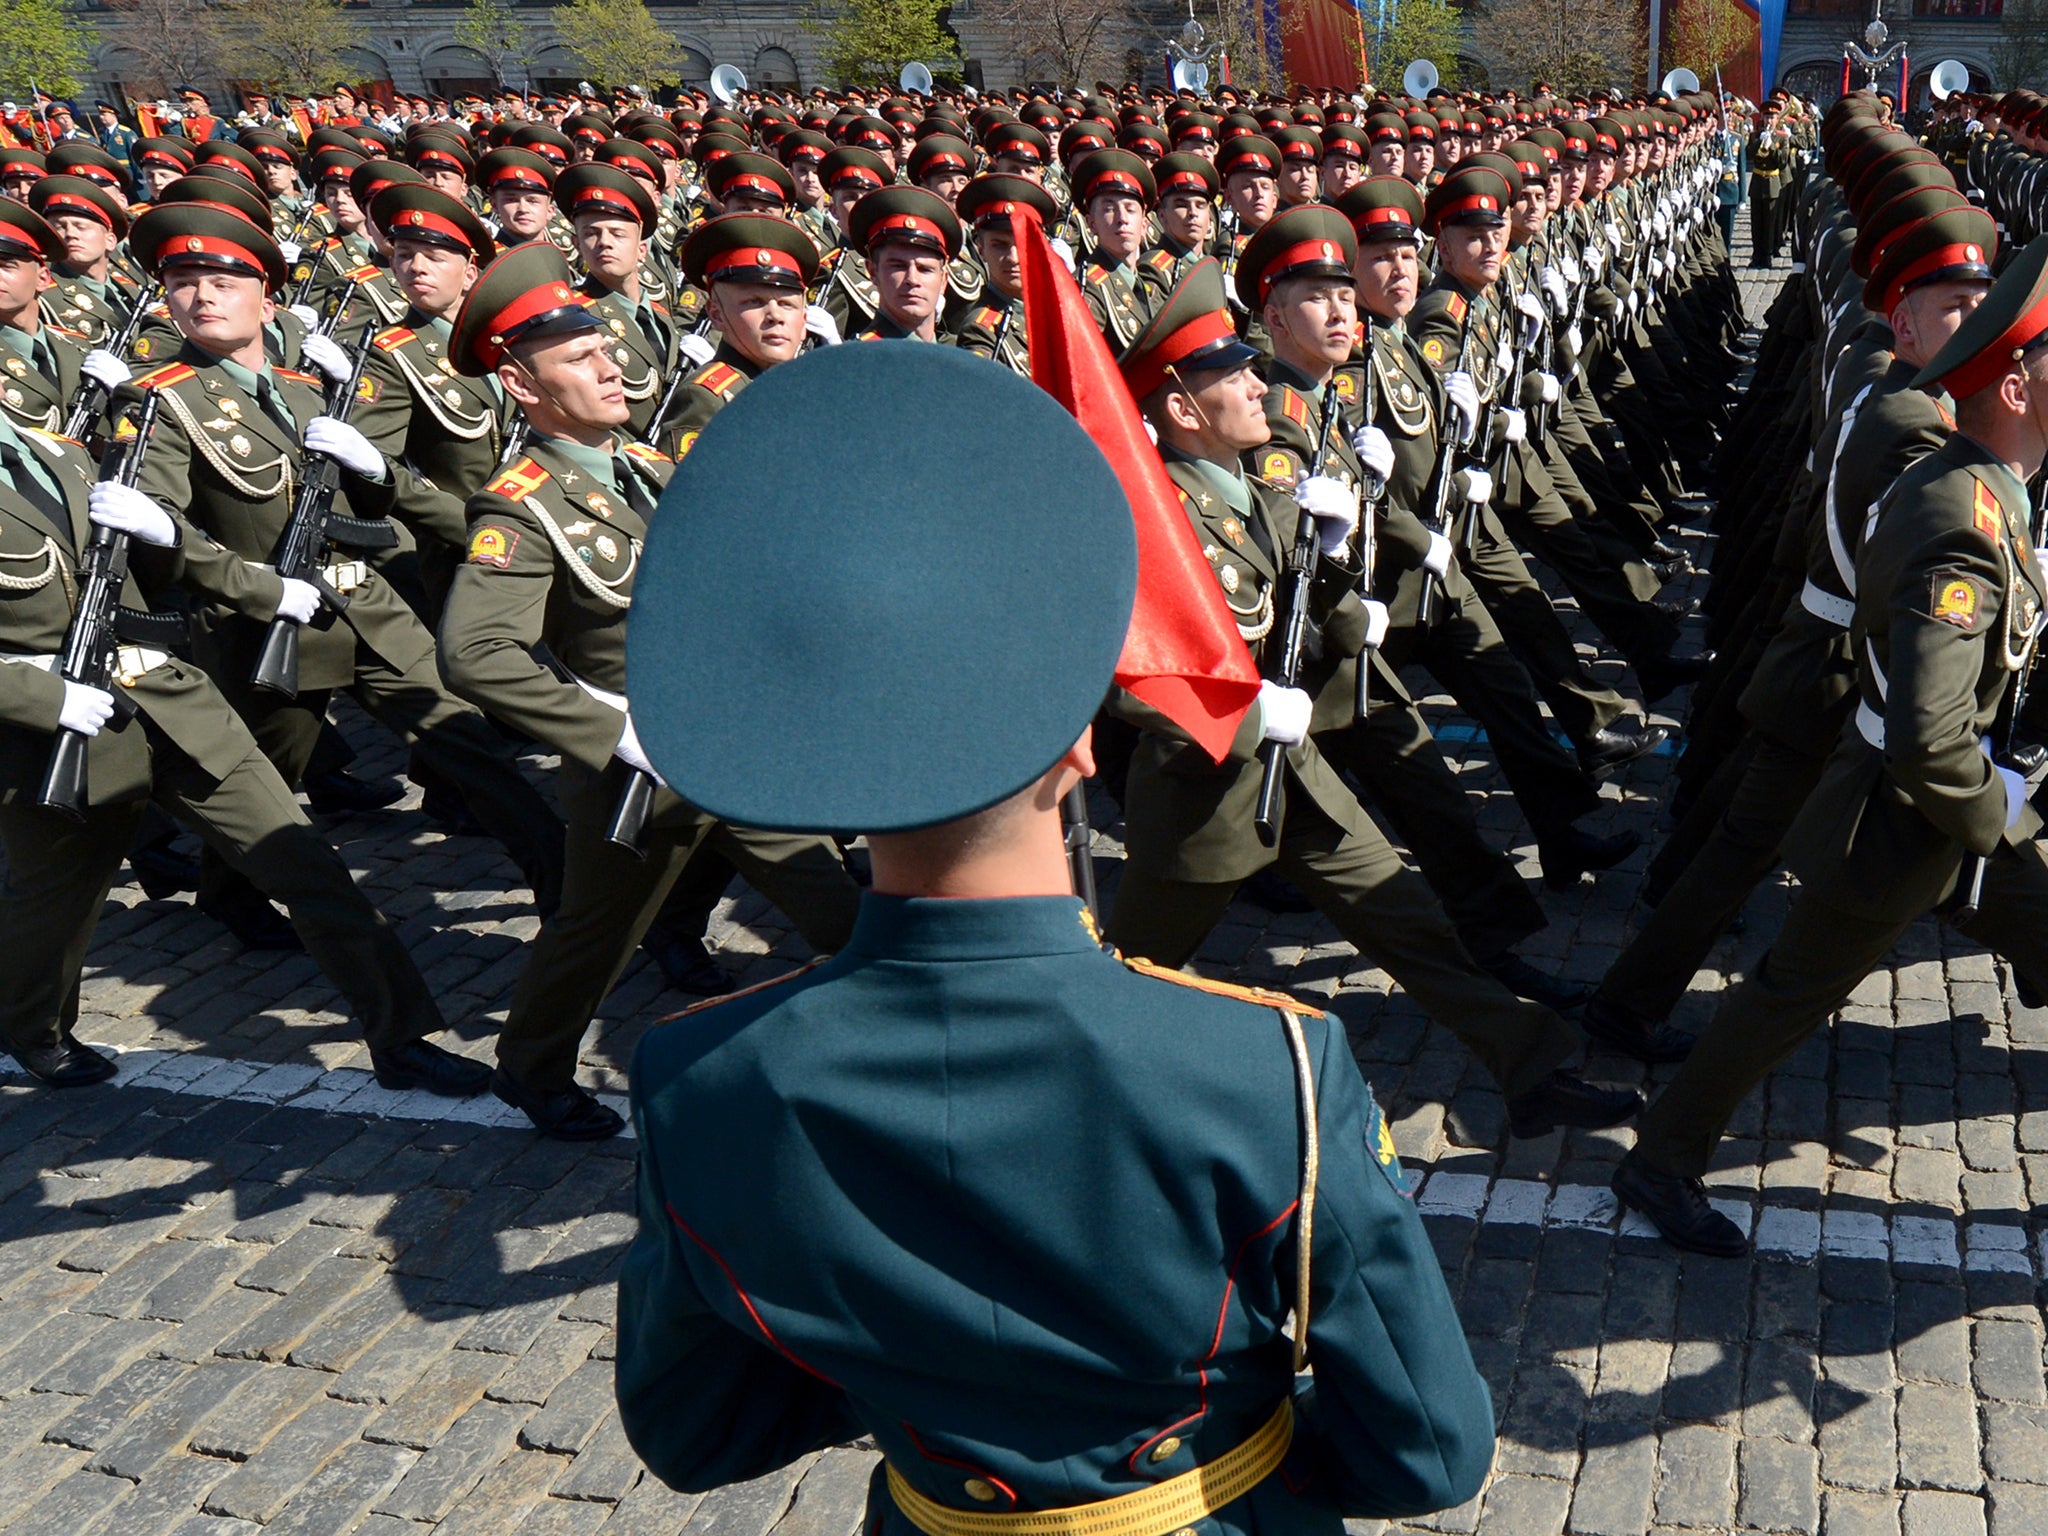 A Russian military parade in Red Square, Moscow